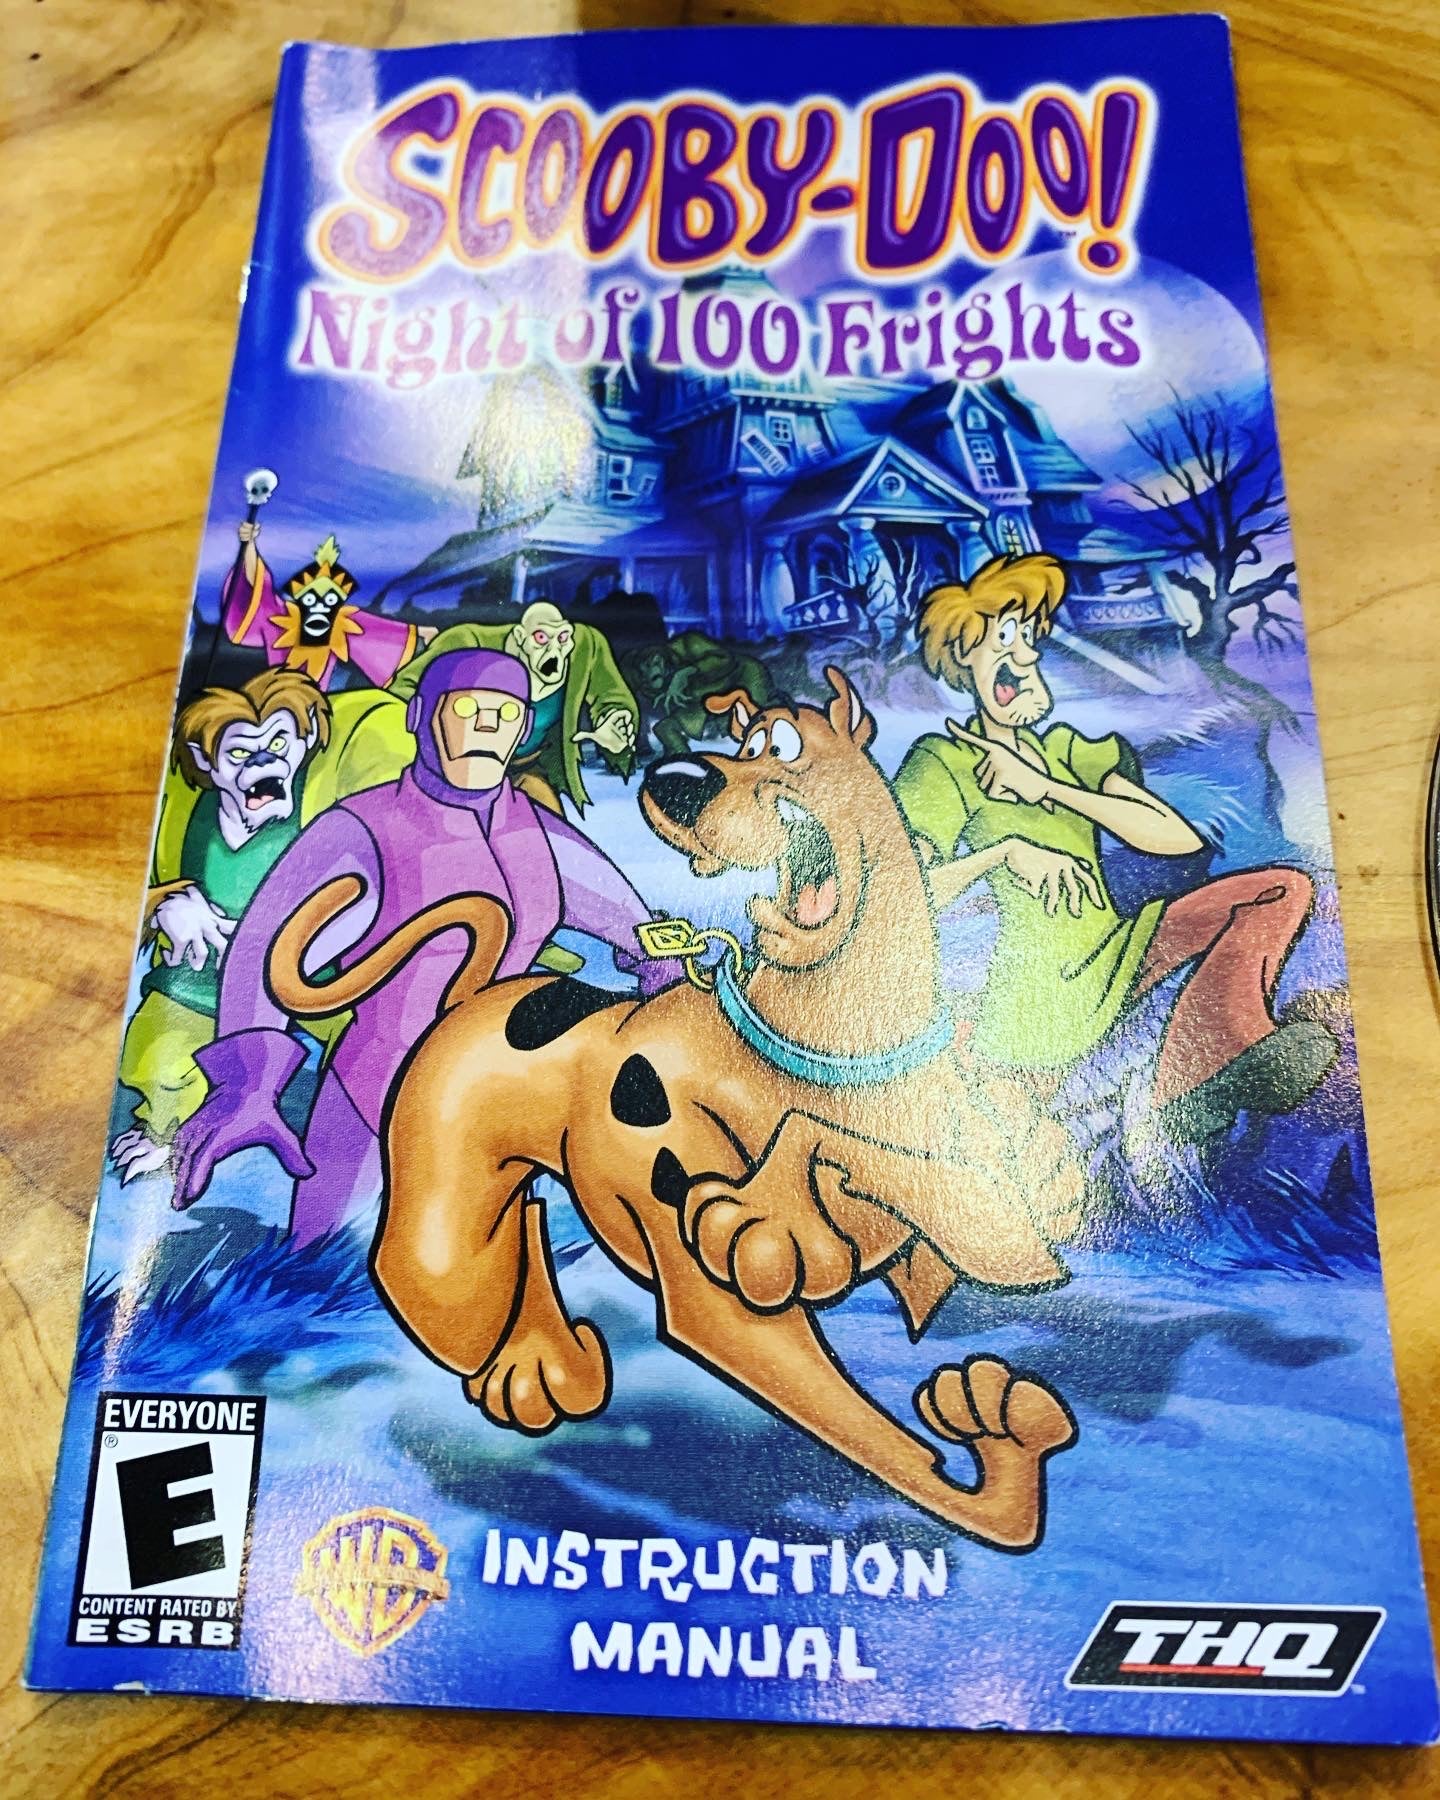 Scooby doo night of 100 frights